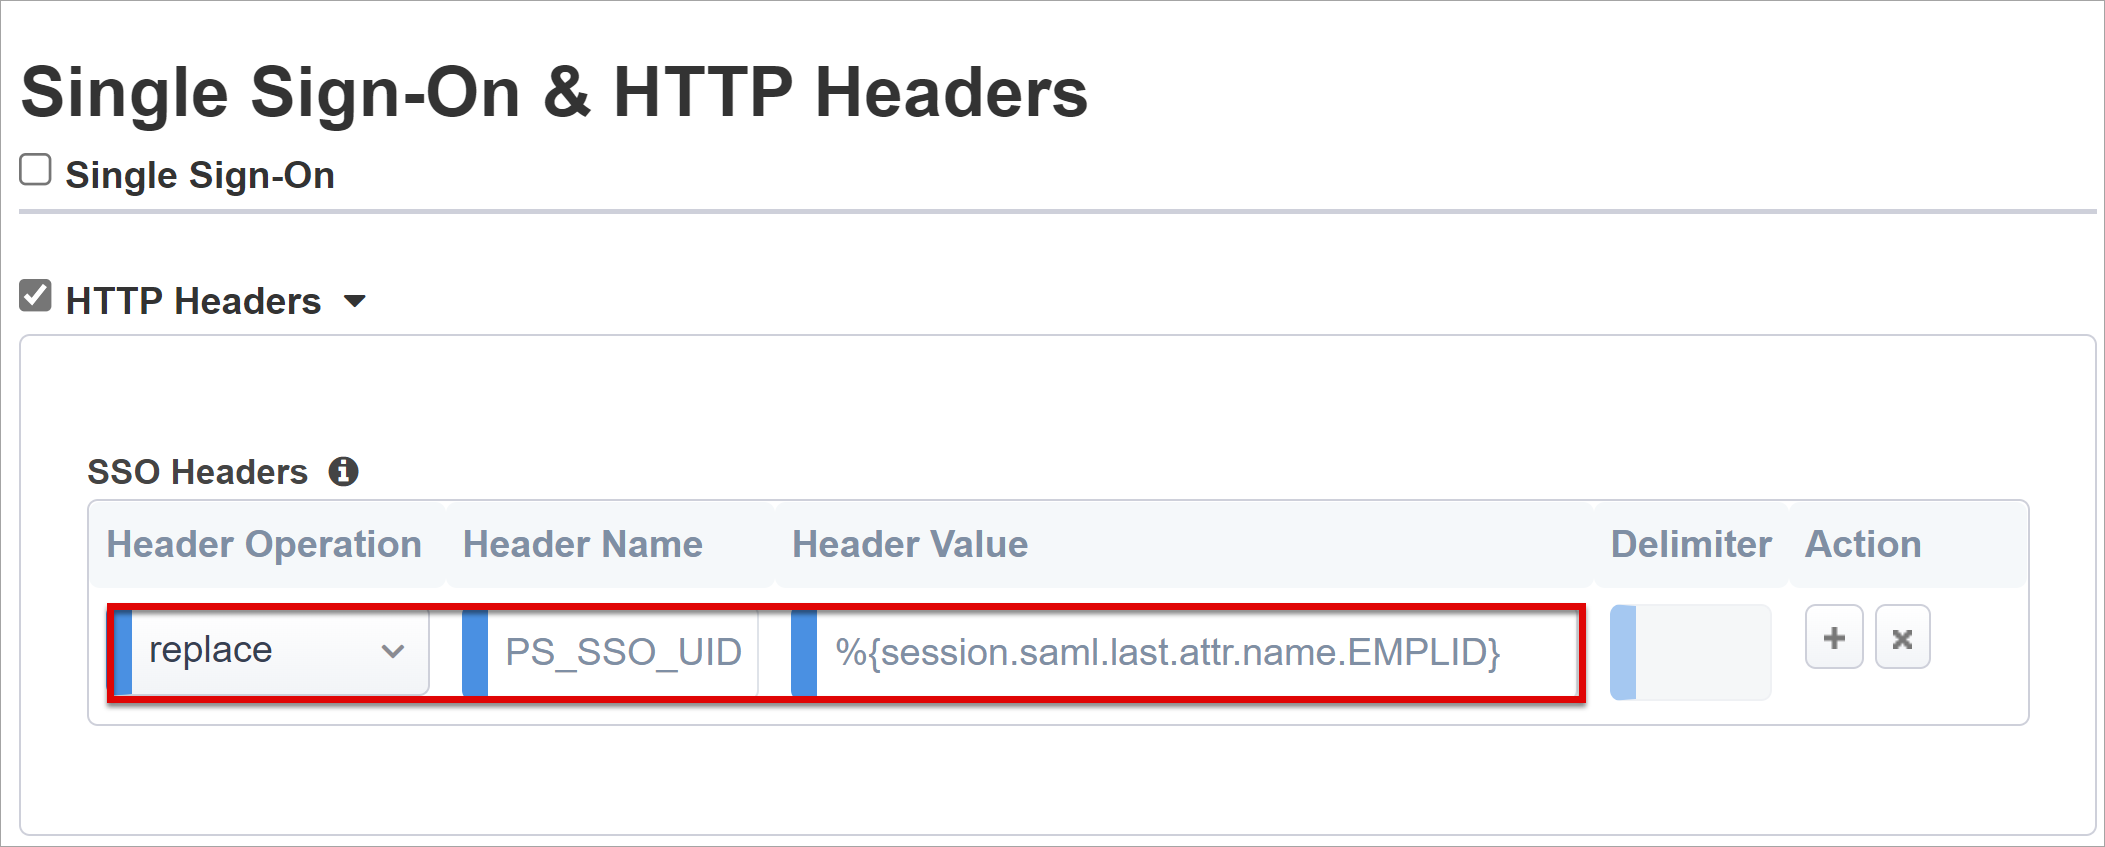 Screenshot of Header Operation, Header Name, and Header value entries under Single sign-On & HTTP Headers.